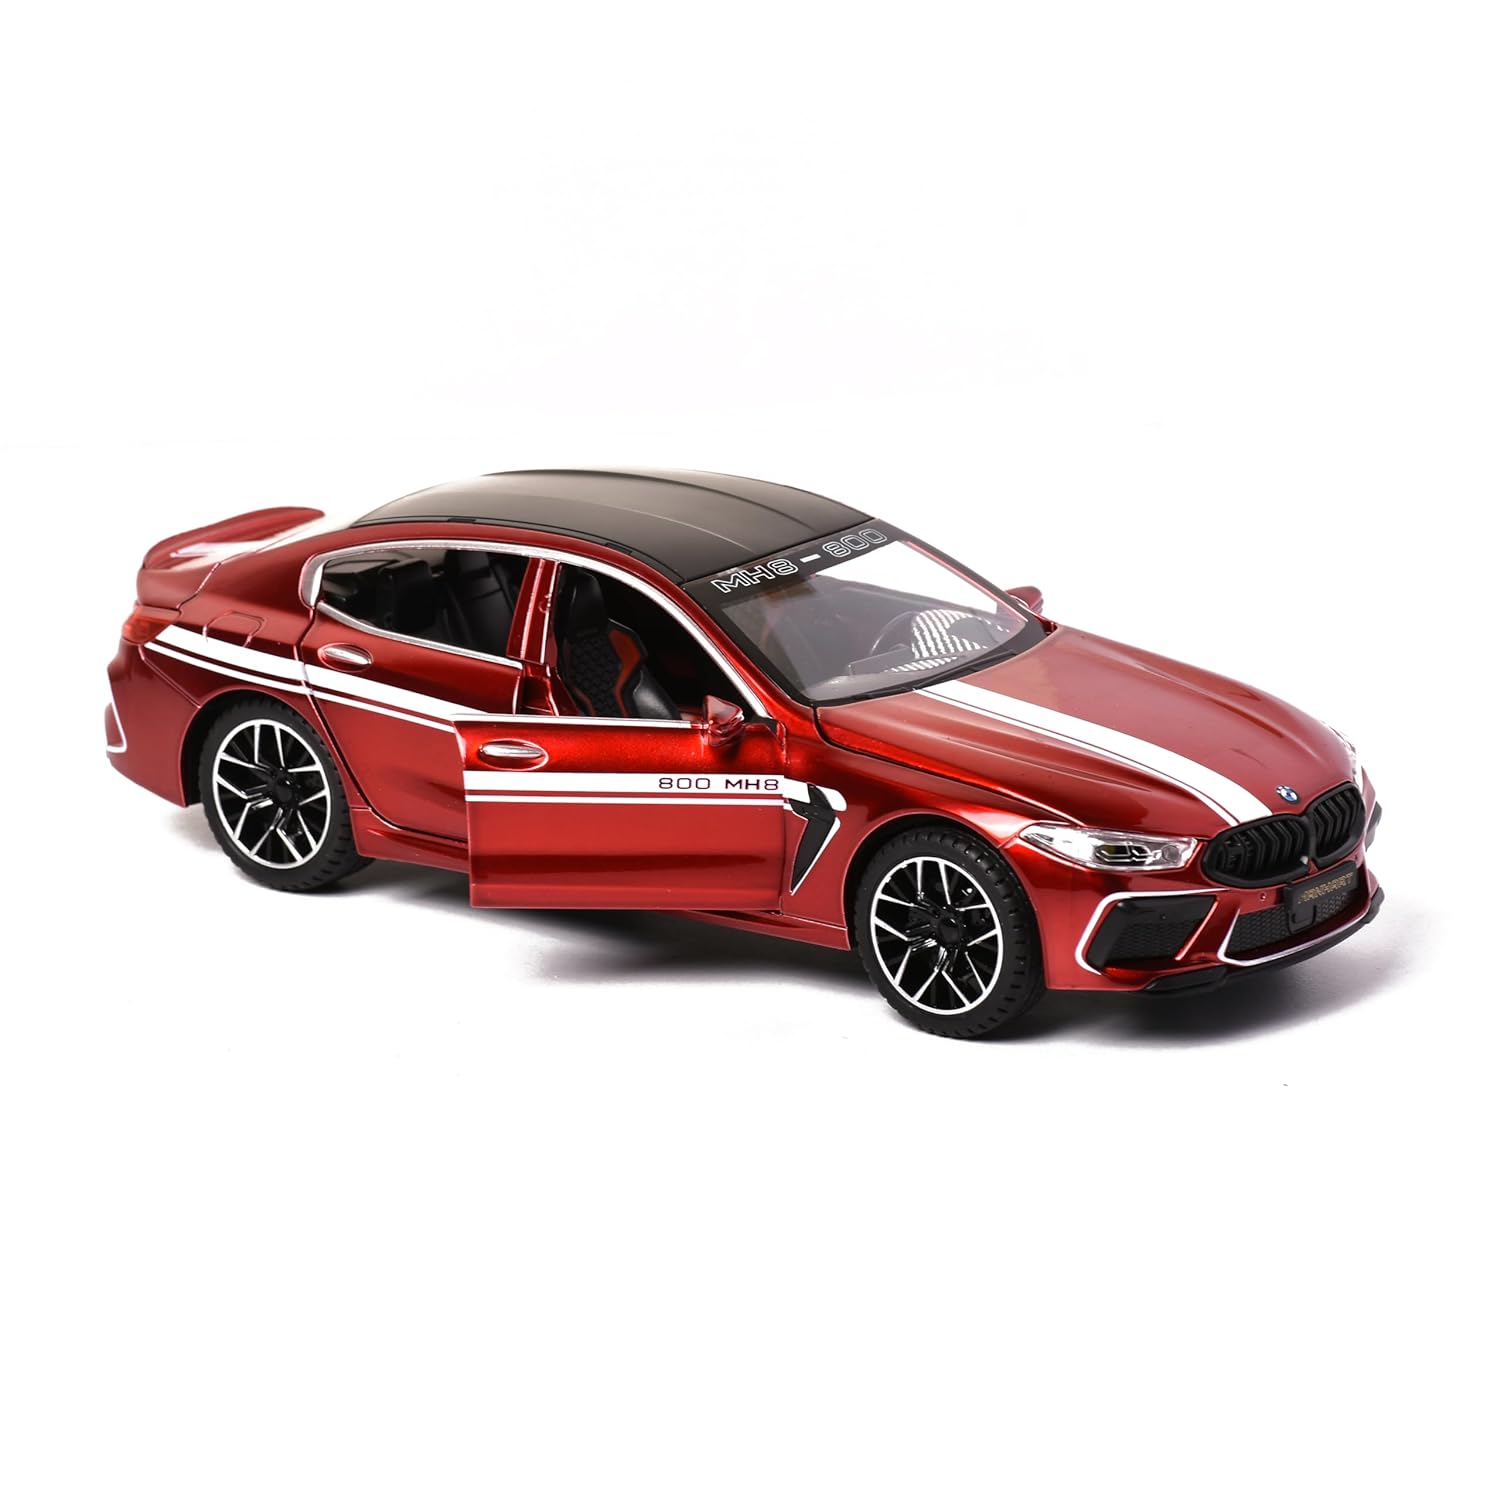 Braintastic Model Diecast Car Toy Vehicle Pull Back Friction Car with Openable Doors Light & Music Toys for Kids Age 3+ Years (BMW Red)